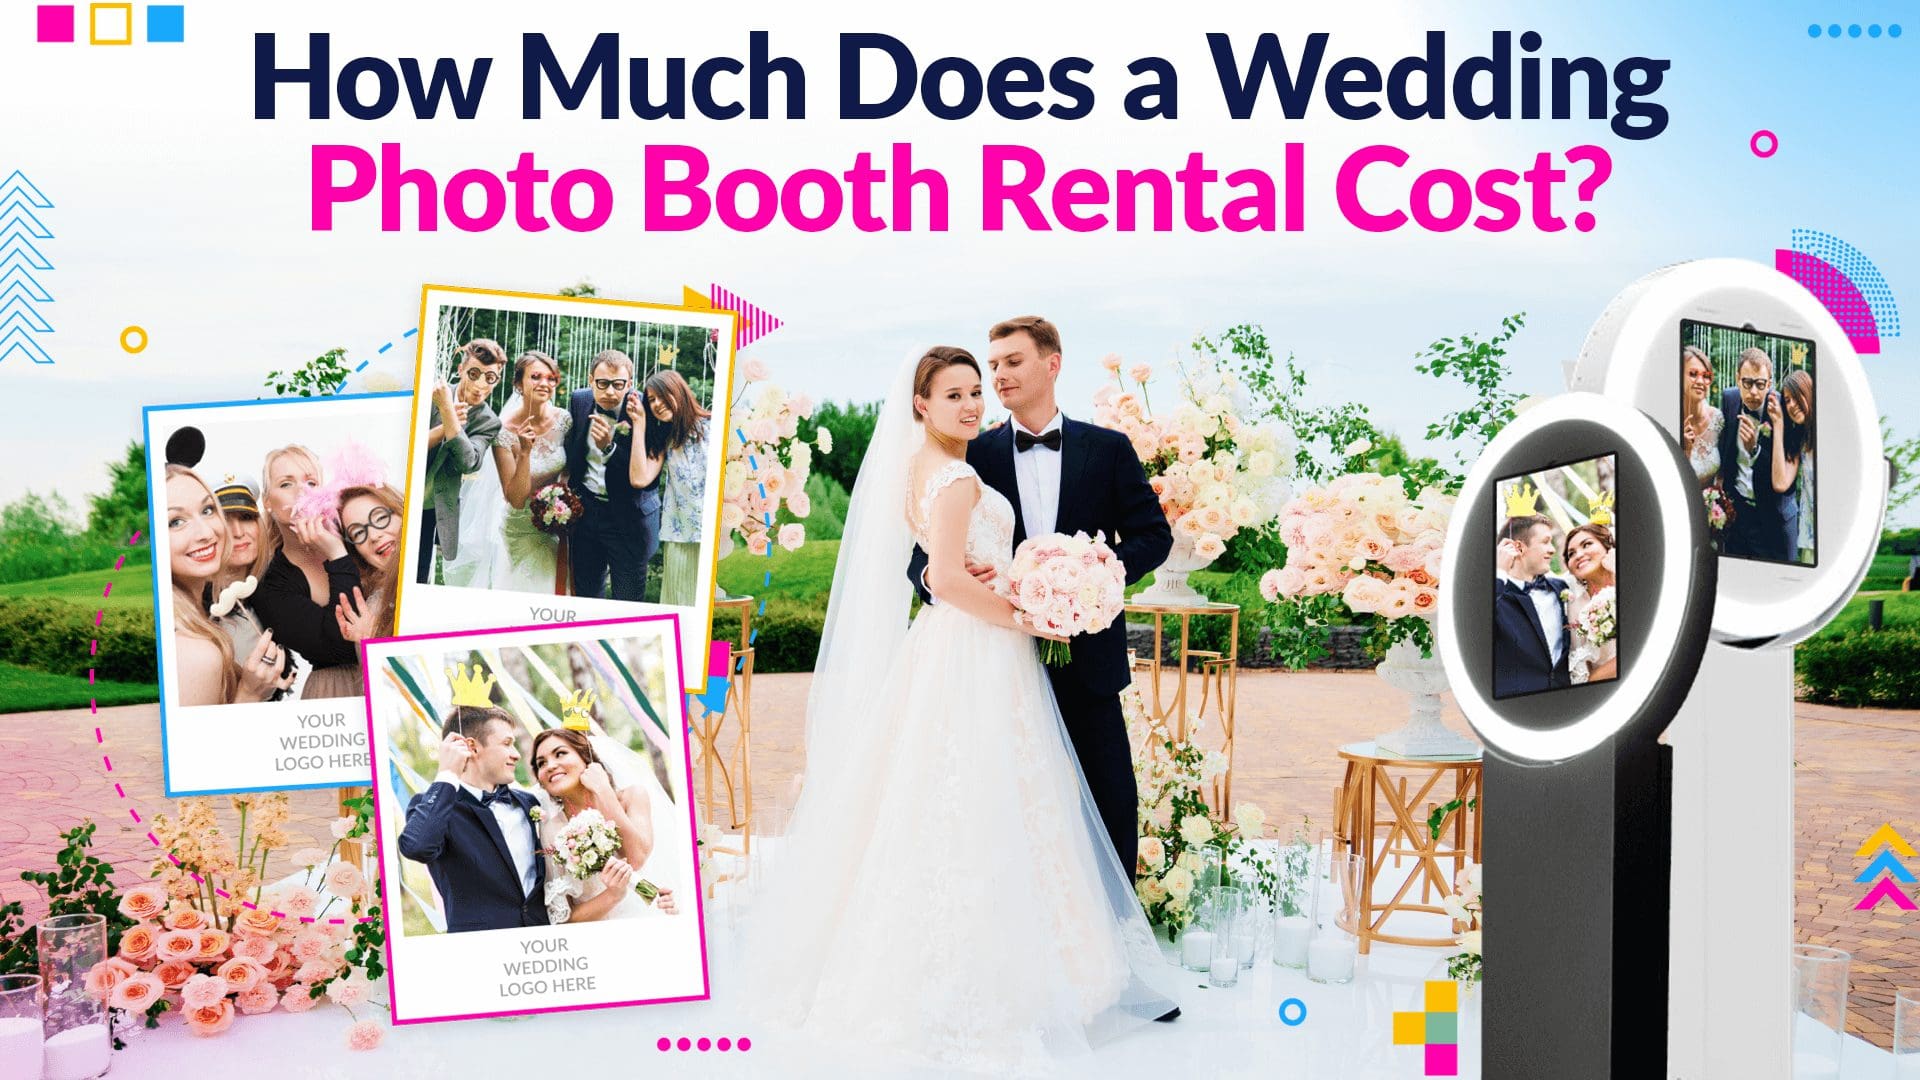 How much does a wedding photo booth rental cost